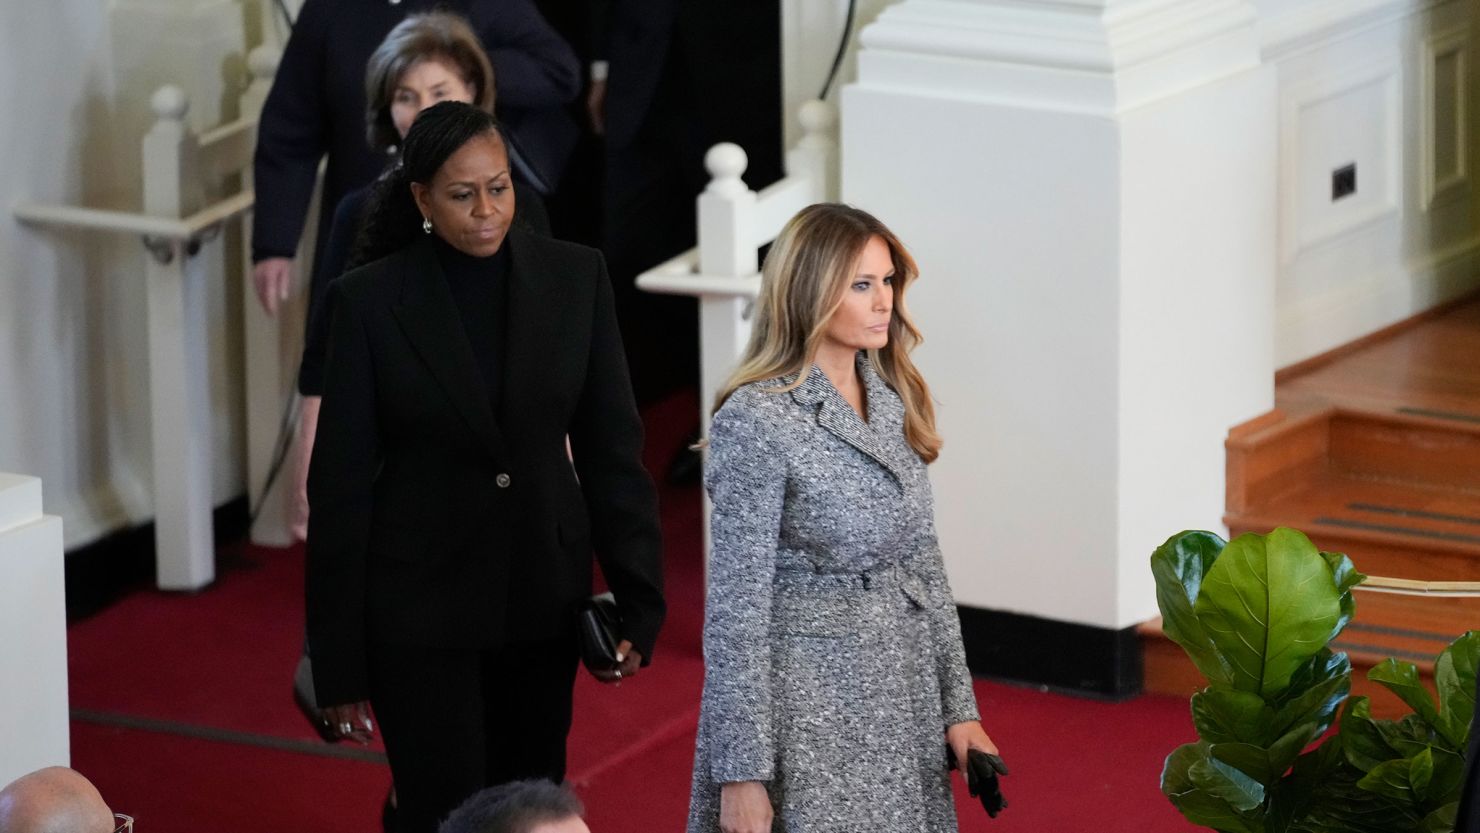 Former first ladies, from right, Melania Trump, Michelle Obama, Laura Bush and Hillary Clinton, arrive to attend a tribute service for former first lady Rosalynn Carter at Glenn Memorial Church on Tuesday, November 28, in Atlanta.